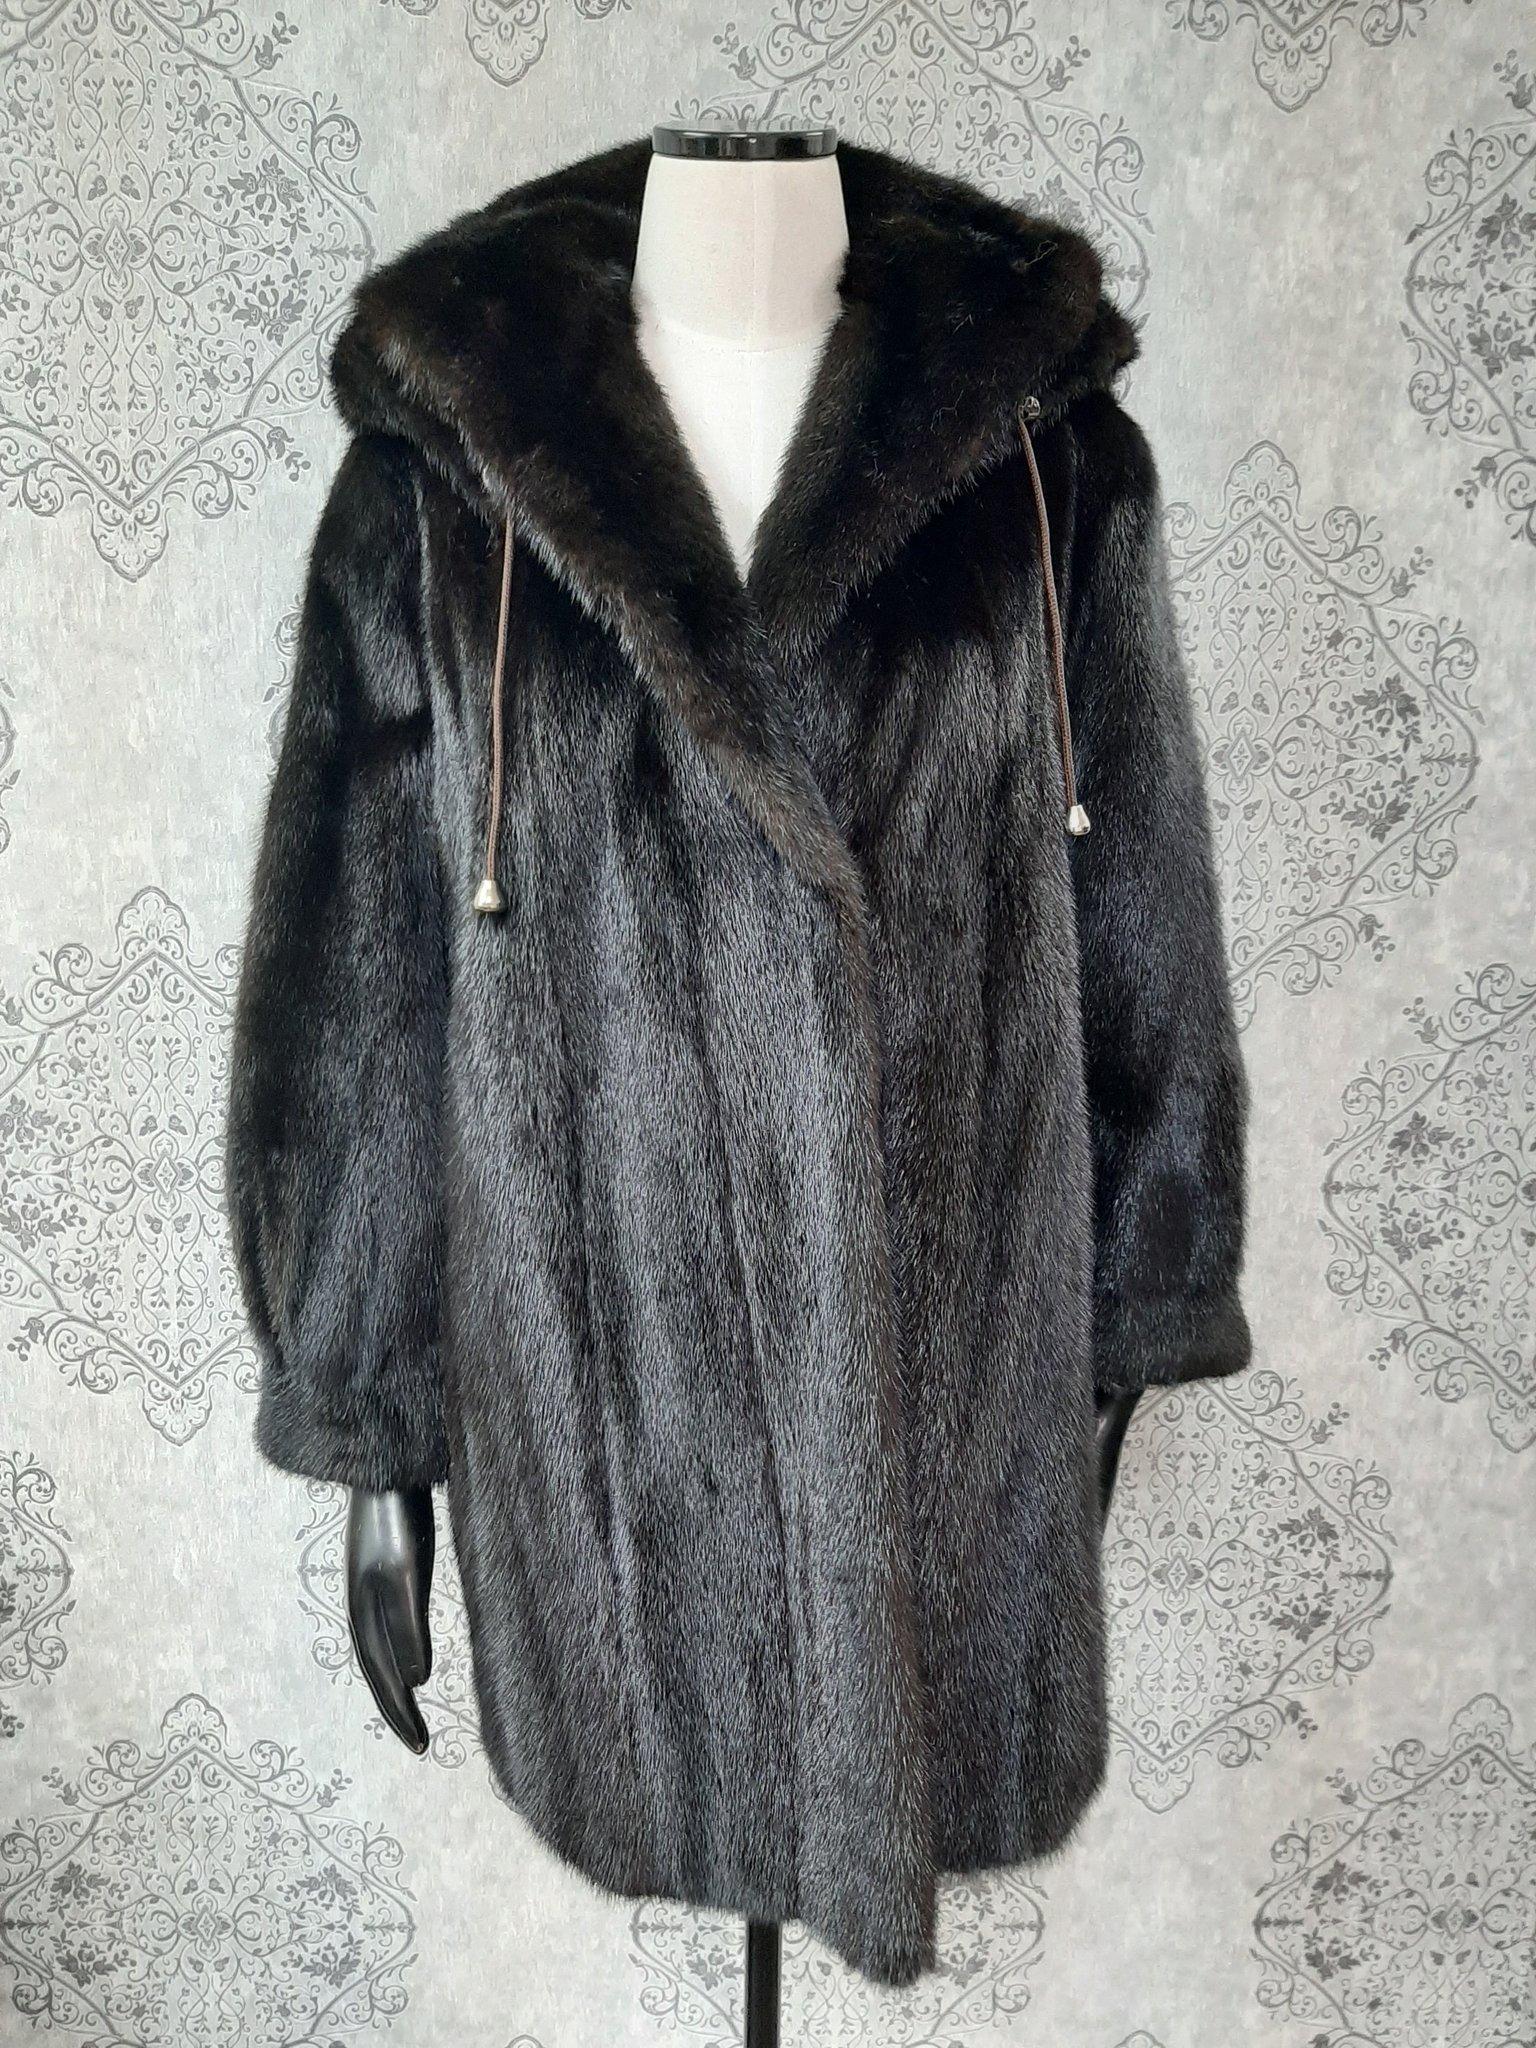 PRODUCT DESCRIPTION:

Brand new luxurious Mink fur coat with a hood

Condition: Brand New

Closure: Buttons

Color: Brown

Material: Mink

Garment type: Coat

Sleeves: Princess cuffs

Pockets: two pockets

Collar: Short collar

Lining: Shirred Silk